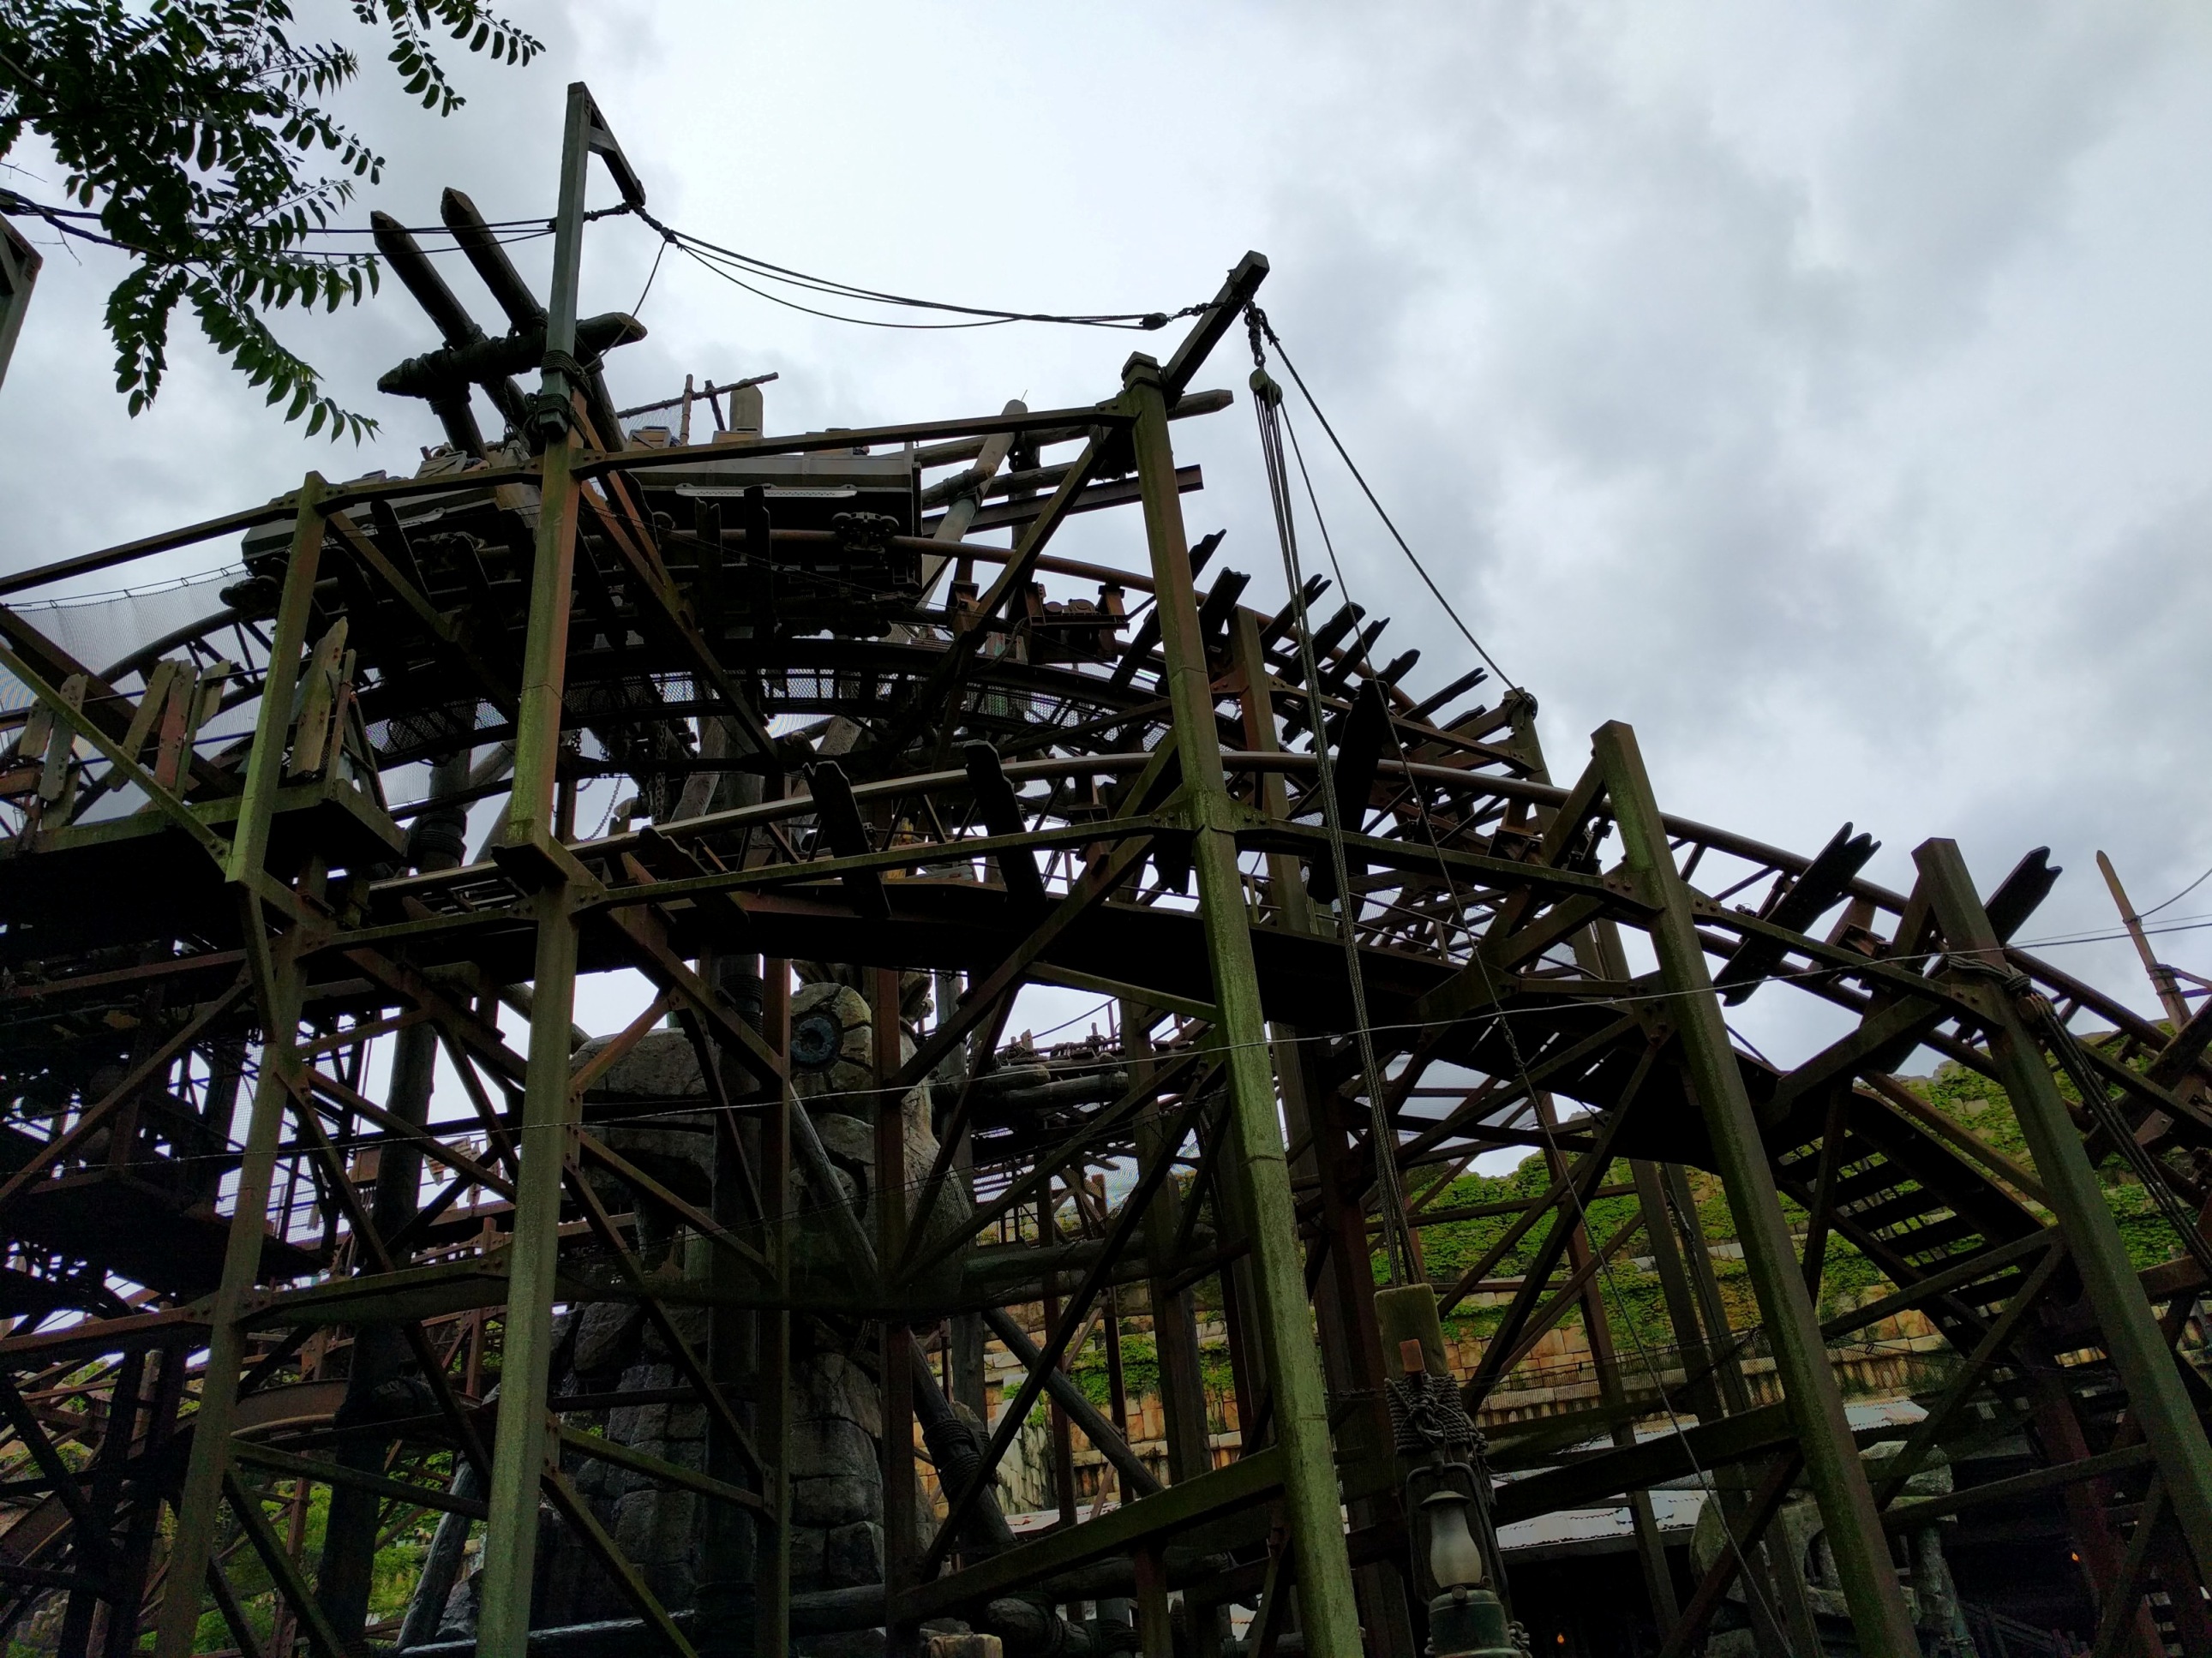 The compact coaster isn't large or too intense, but it has some decent thrills.